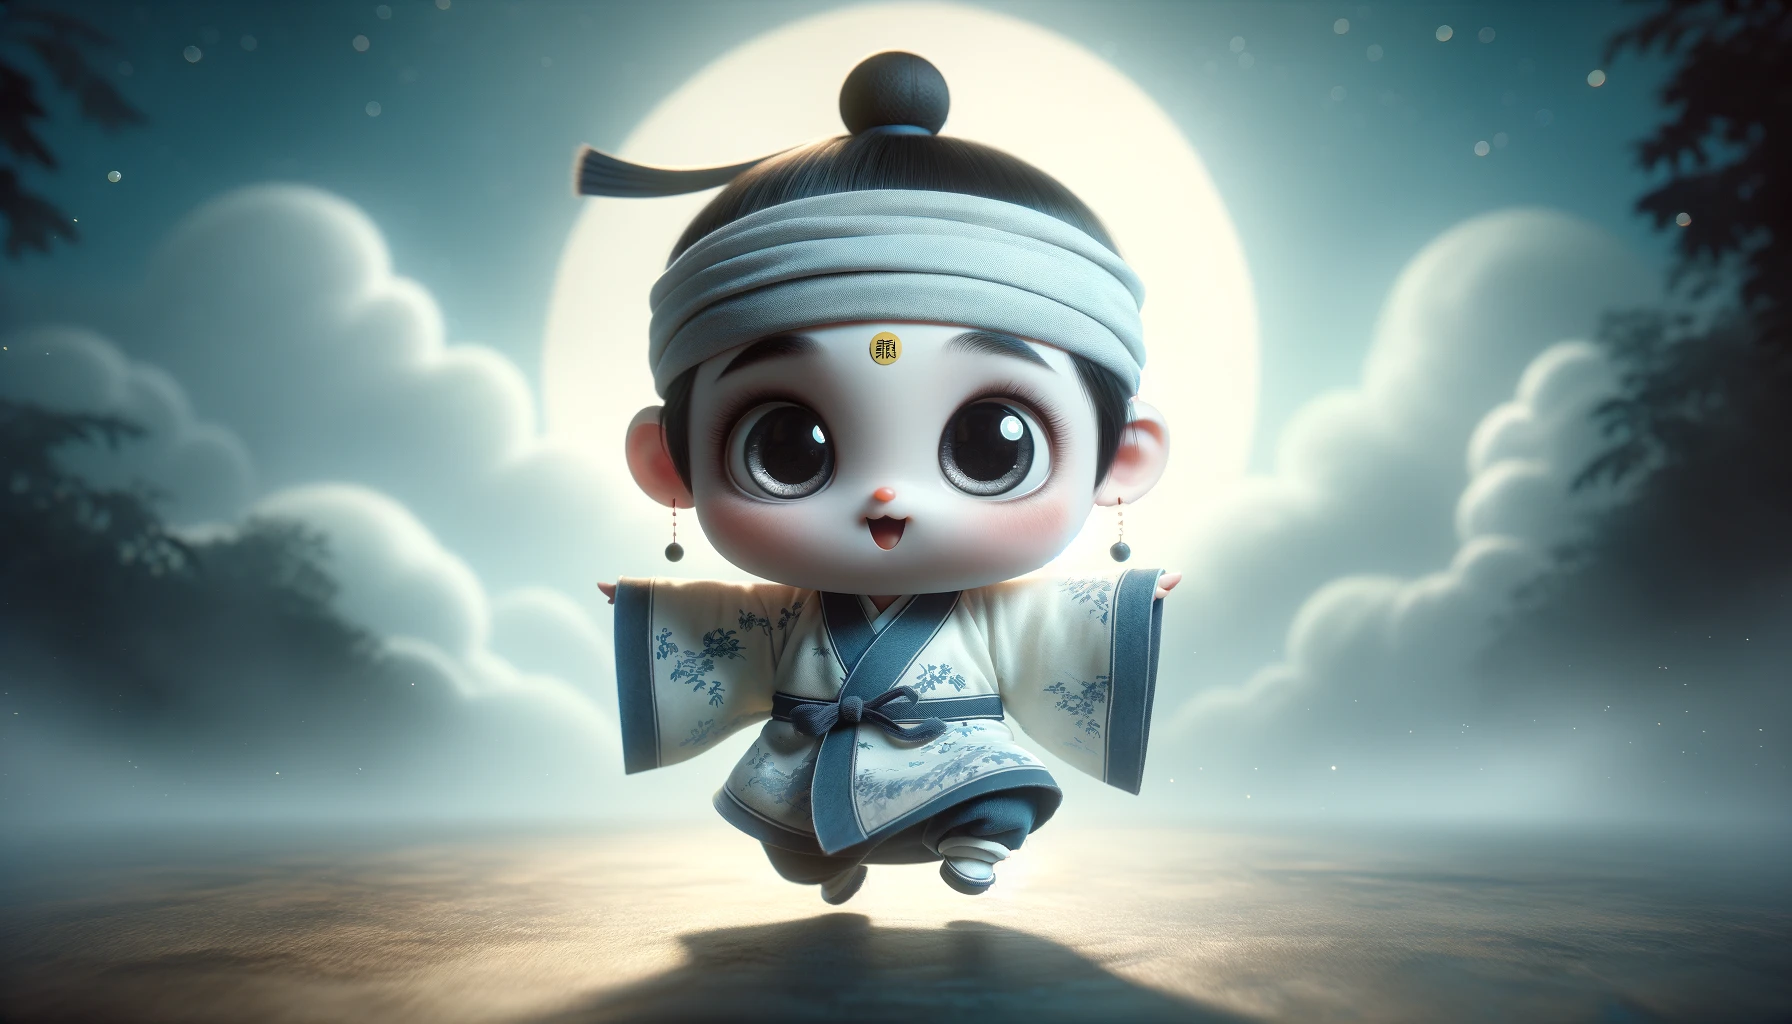 A cute baby Jiangshi (Chinese hopping vampire) in a playful and whimsical style. The baby Jiangshi has large, expressive eyes and a traditional blue and white Qing dynasty robe. It wears a small, rounded black hat and has a yellow paper talisman stuck to its forehead. The background is a serene, moonlit night with soft, muted tones of blues and greys, creating a gentle and enchanting atmosphere. The image should be wide, capturing the baby Jiangshi mid-hop, looking joyful and innocent.